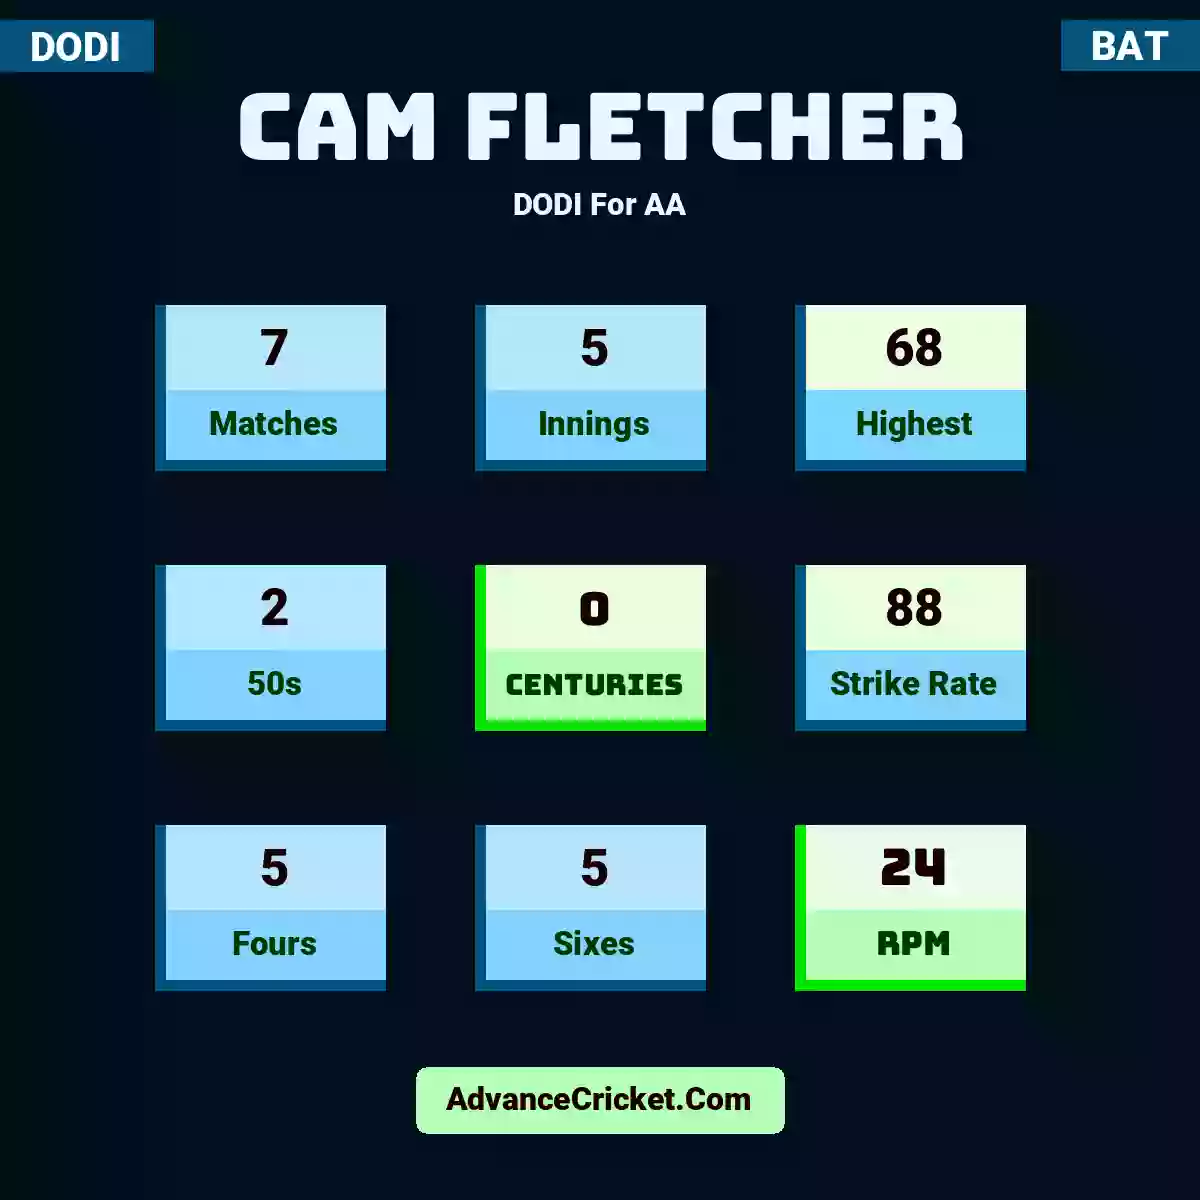 Cam Fletcher DODI  For AA, Cam Fletcher played 7 matches, scored 68 runs as highest, 2 half-centuries, and 0 centuries, with a strike rate of 88. C.Fletcher hit 5 fours and 5 sixes, with an RPM of 24.